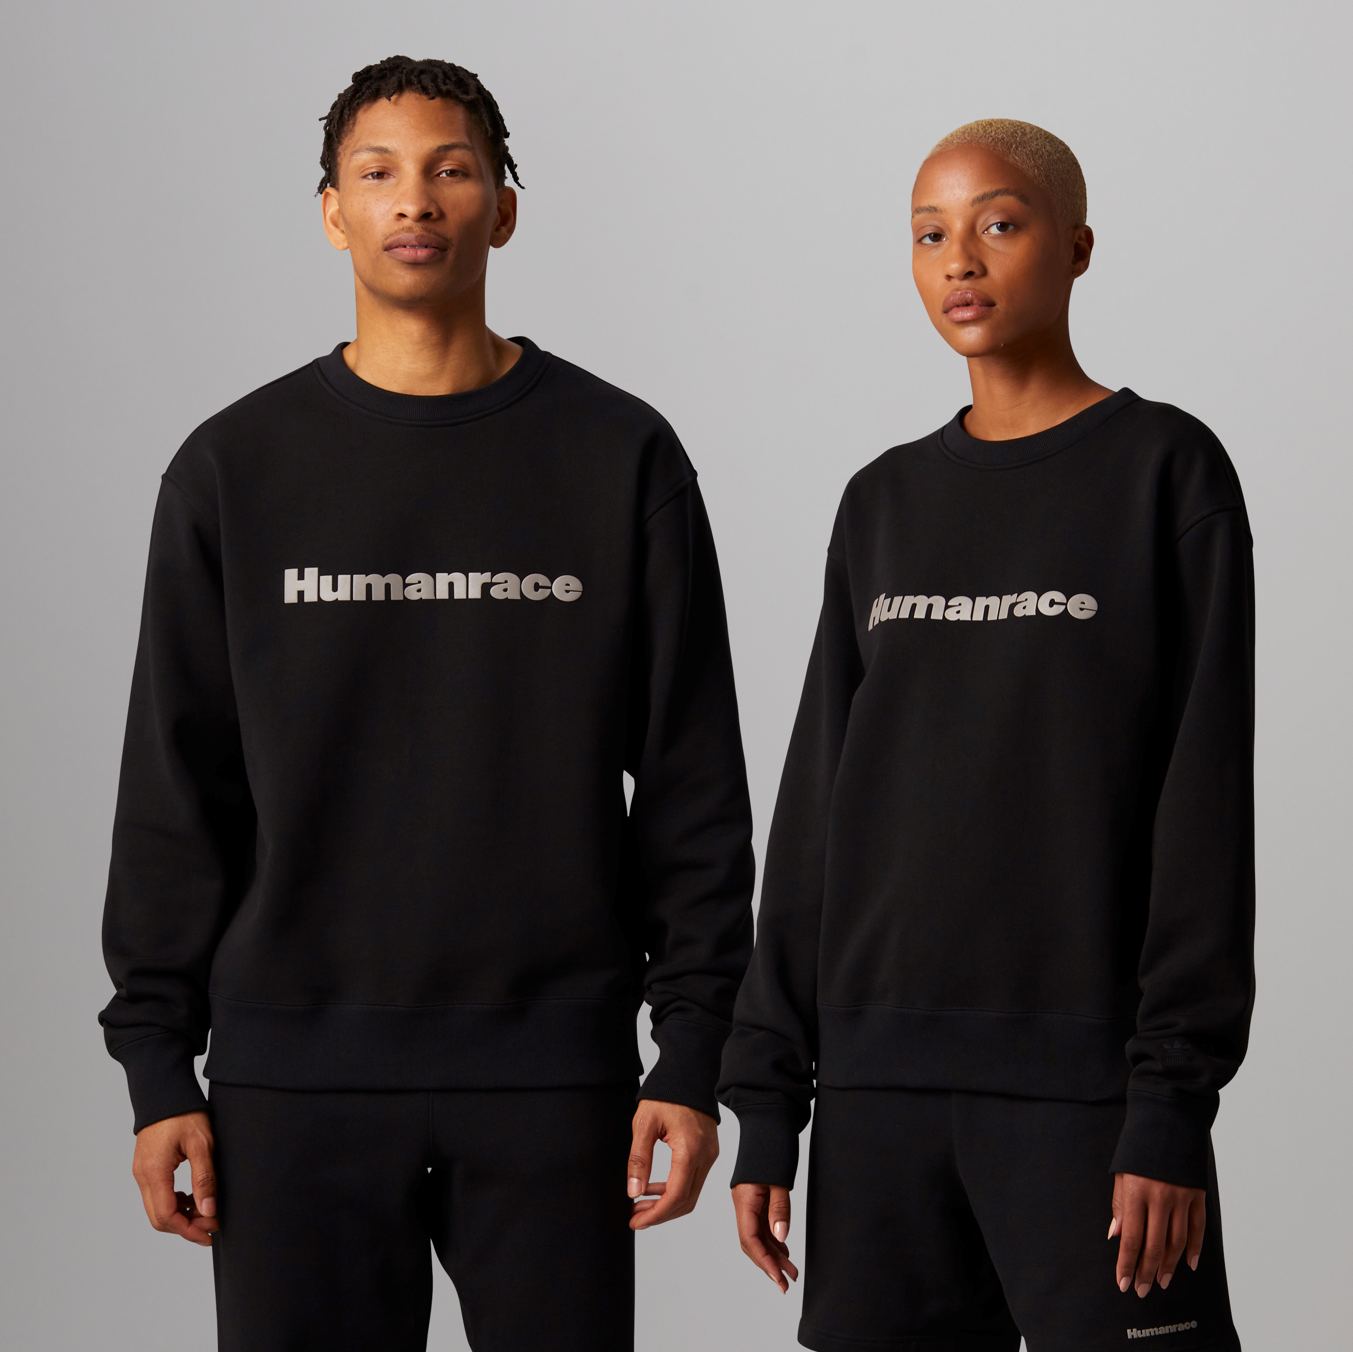 HumanRace Premium Basics Collection Launched by adidas Originals and Pharrell Williams sneakerize.gr